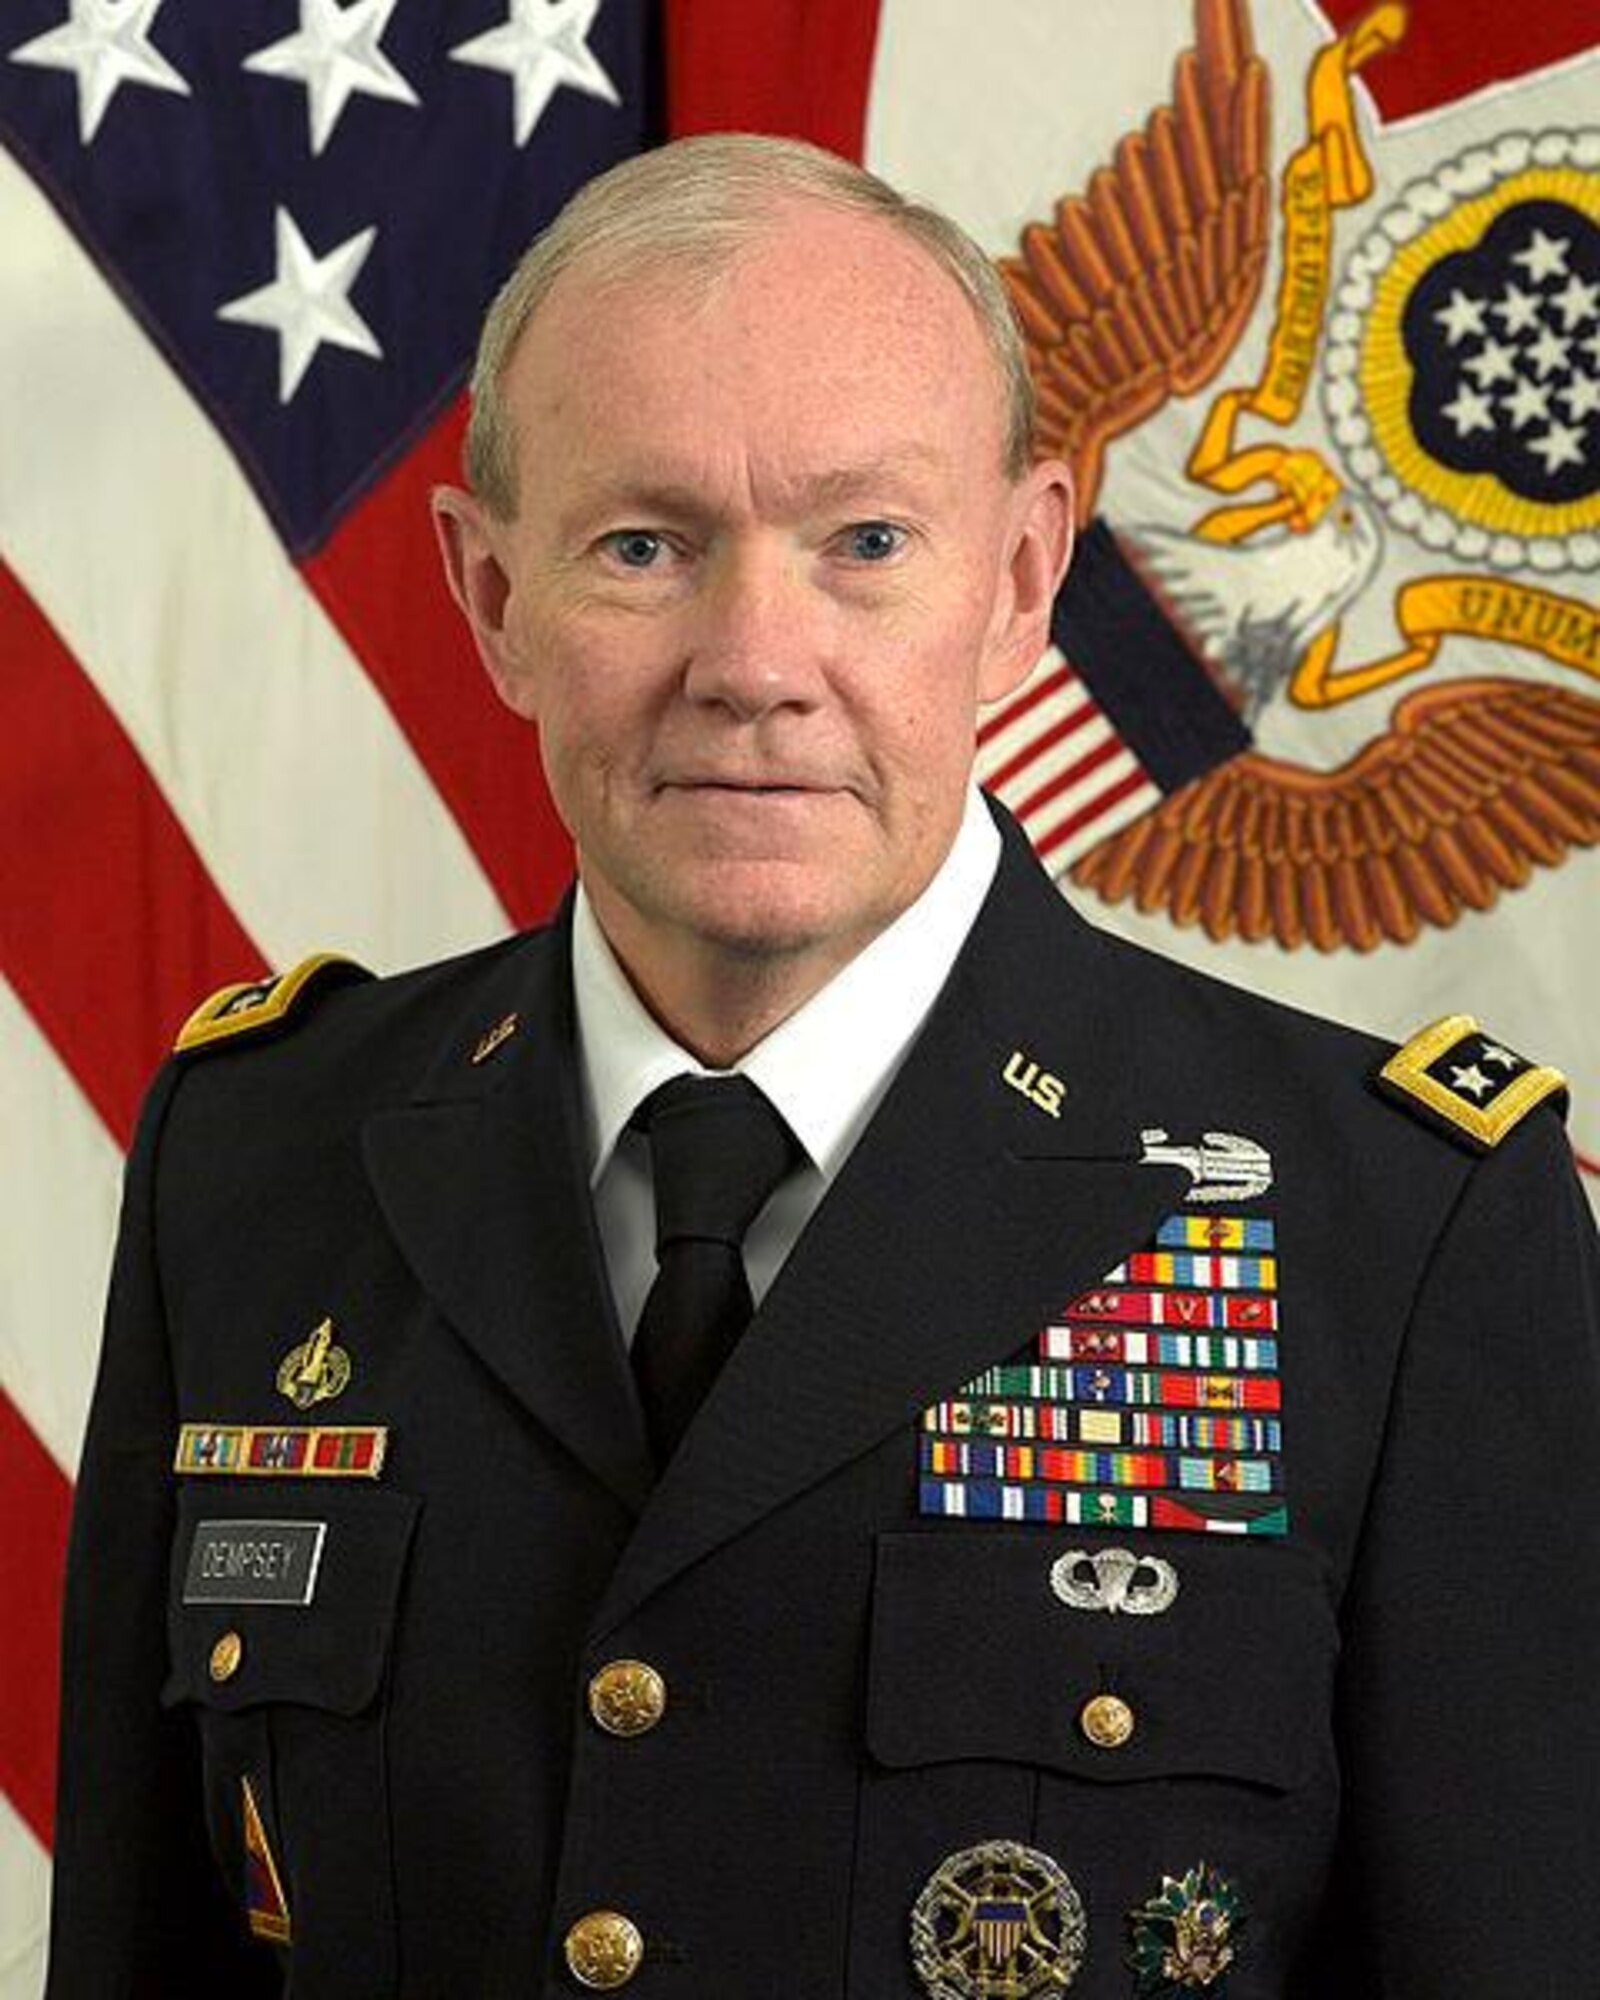 The 18th Chairman of the Joint Chiefs of Staff, Army General Martin E. Dempsey.